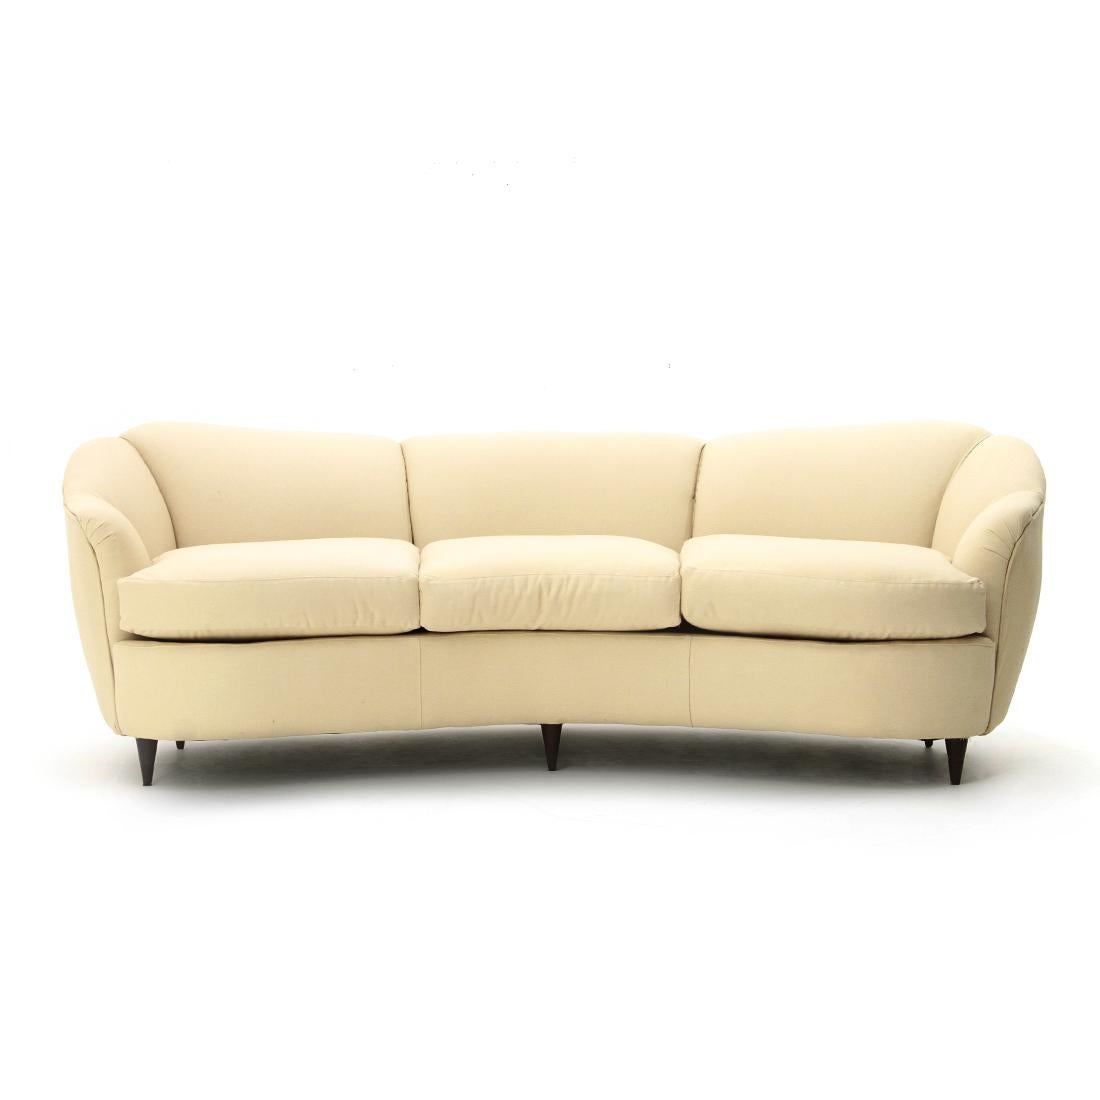 Italian-made sofa created in the 1940s.
Padded wooden structure lined with new cream-colored fabric.
Seat formed by three cushions.
Cone-shaped legs in turned wood.
Good general condition, some signs on the legs due to normal use over